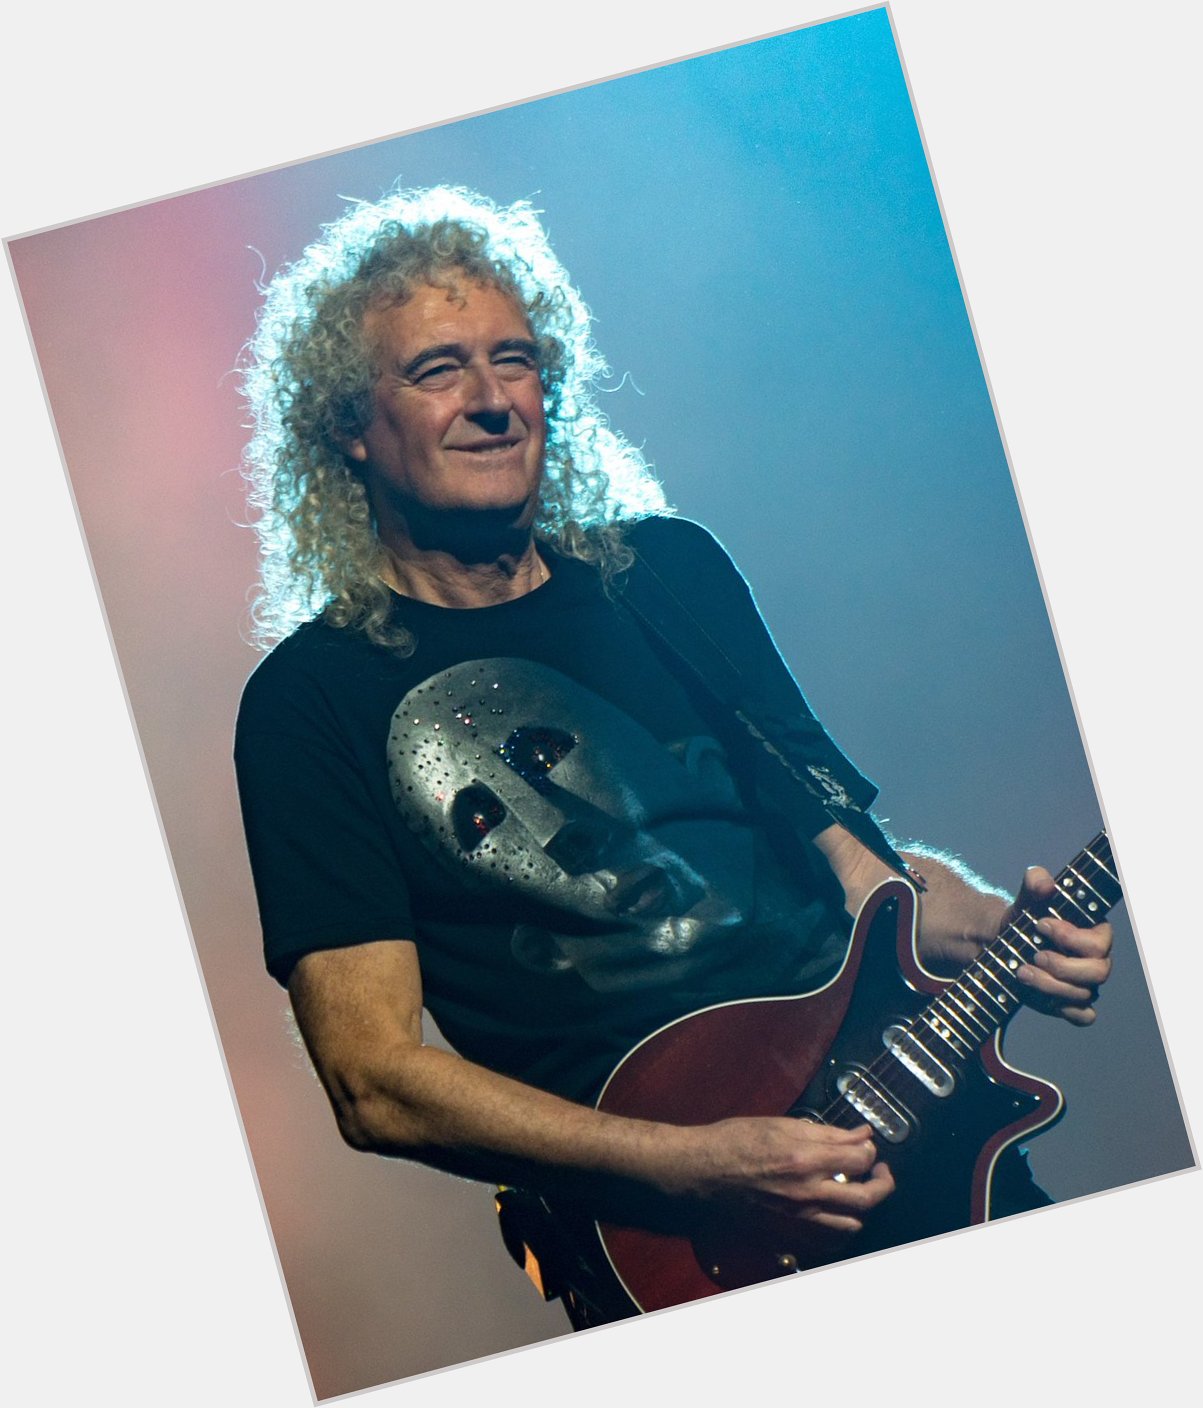 Happy Belated Birthday to the one and only Brian May. Such an inspiration!!! 